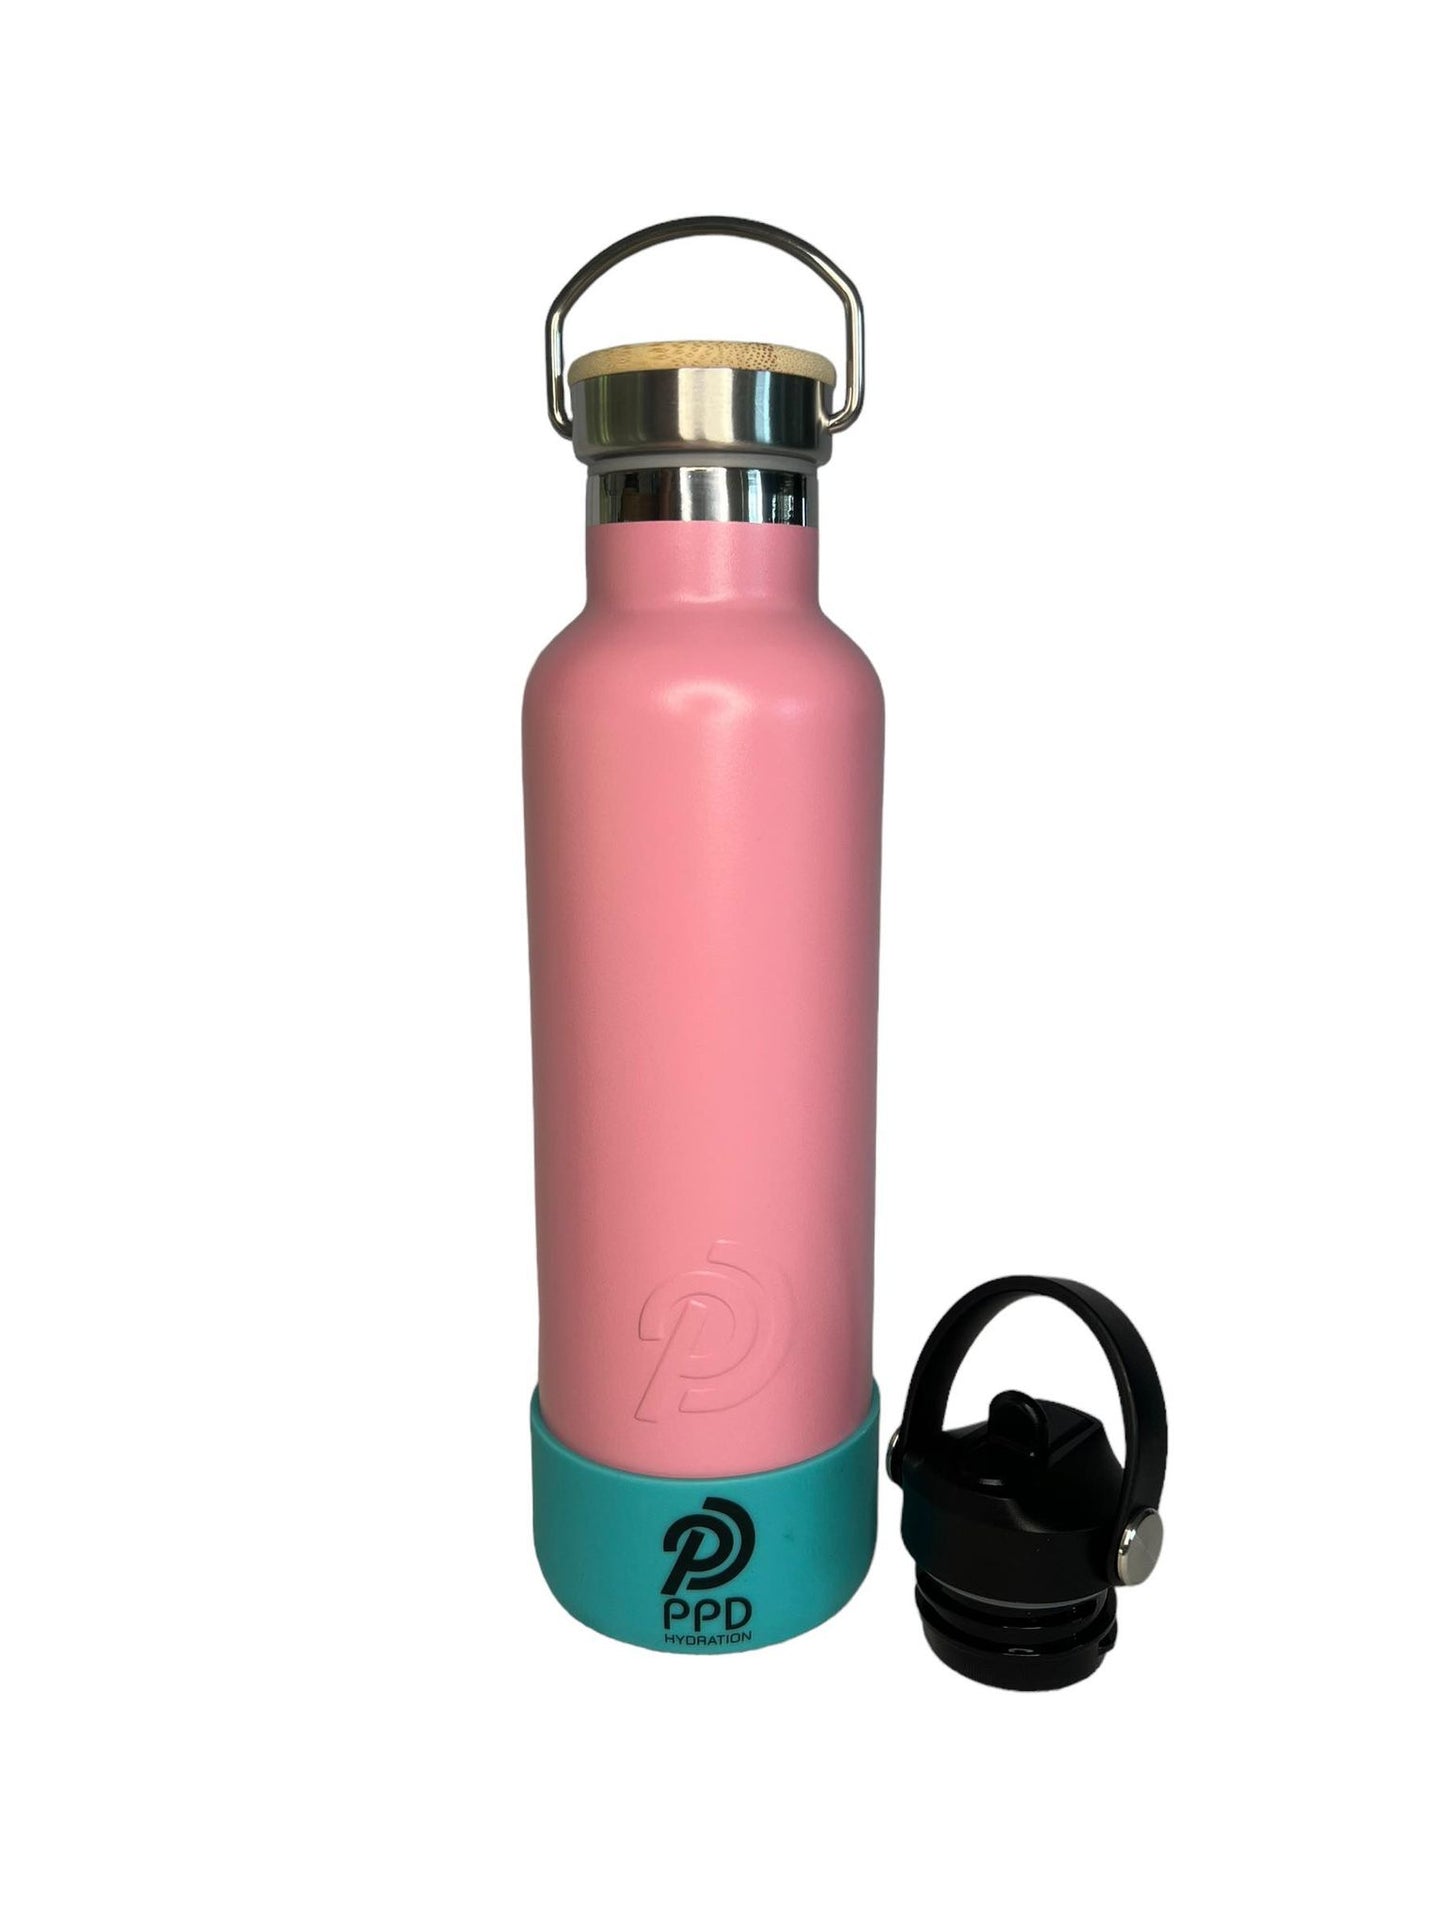 750ml 24oz light pink stainless steel insulated water bottle with teal bumper and sports lid-fc45-43d3-8e67-ff868a79f596